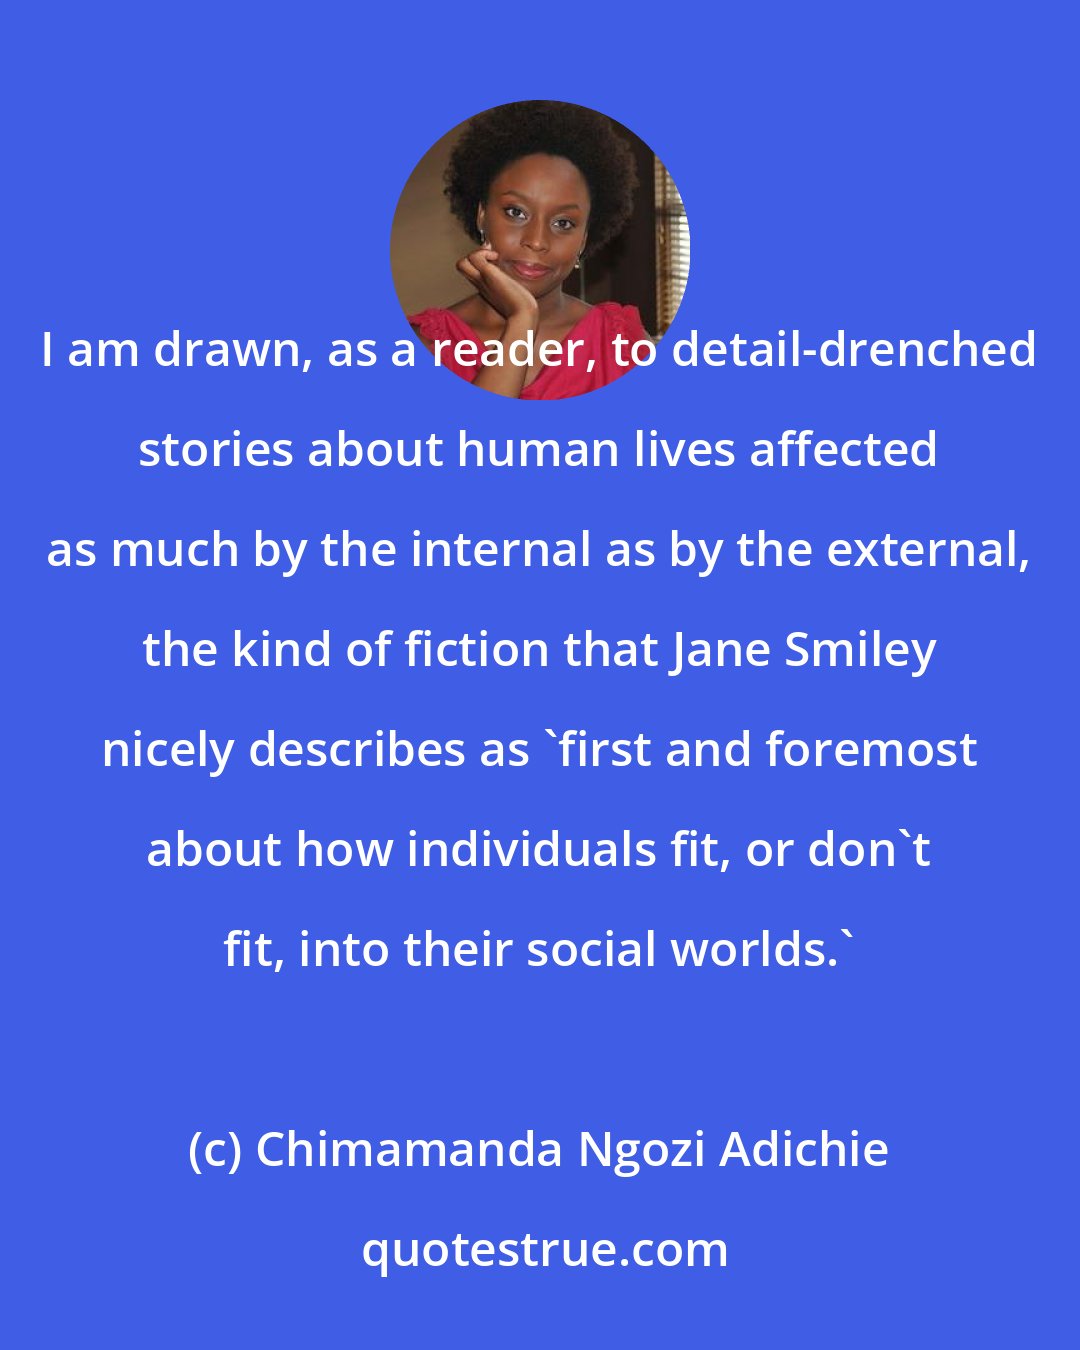 Chimamanda Ngozi Adichie: I am drawn, as a reader, to detail-drenched stories about human lives affected as much by the internal as by the external, the kind of fiction that Jane Smiley nicely describes as 'first and foremost about how individuals fit, or don't fit, into their social worlds.'